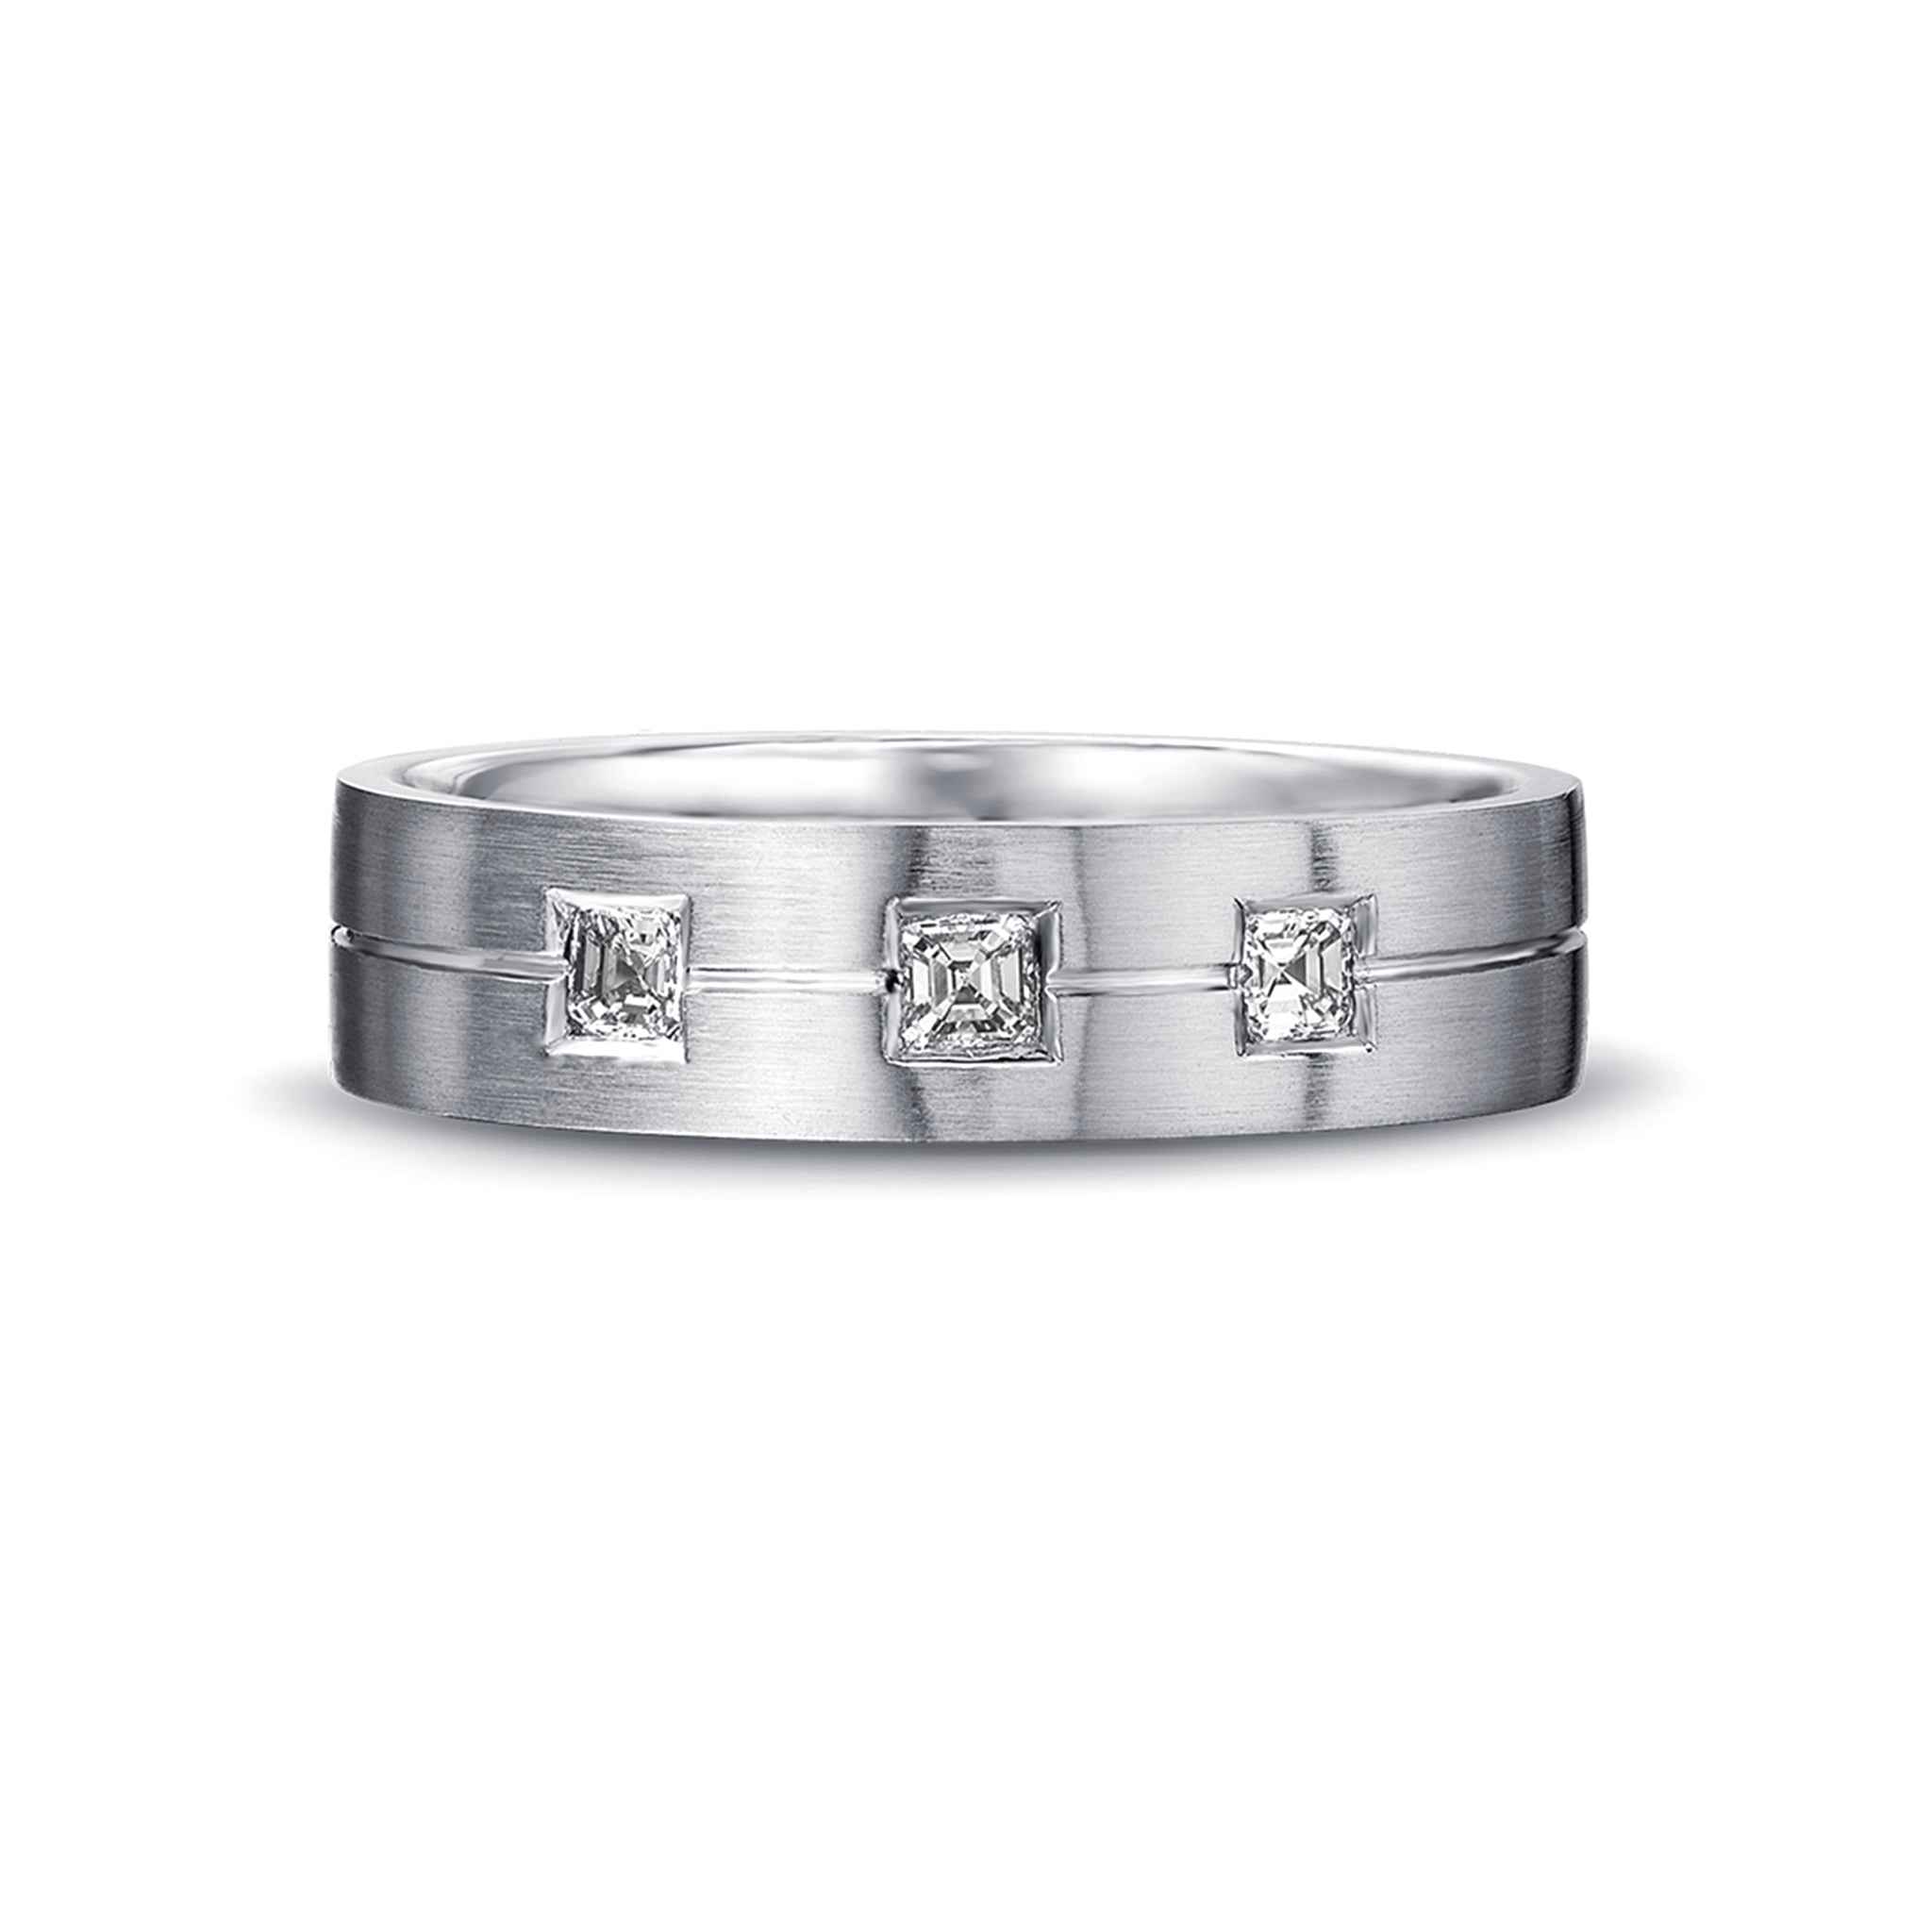 Shimansky - Max-Line Trio Square Diamond Grooved Wedding Band in Brushed Palladium